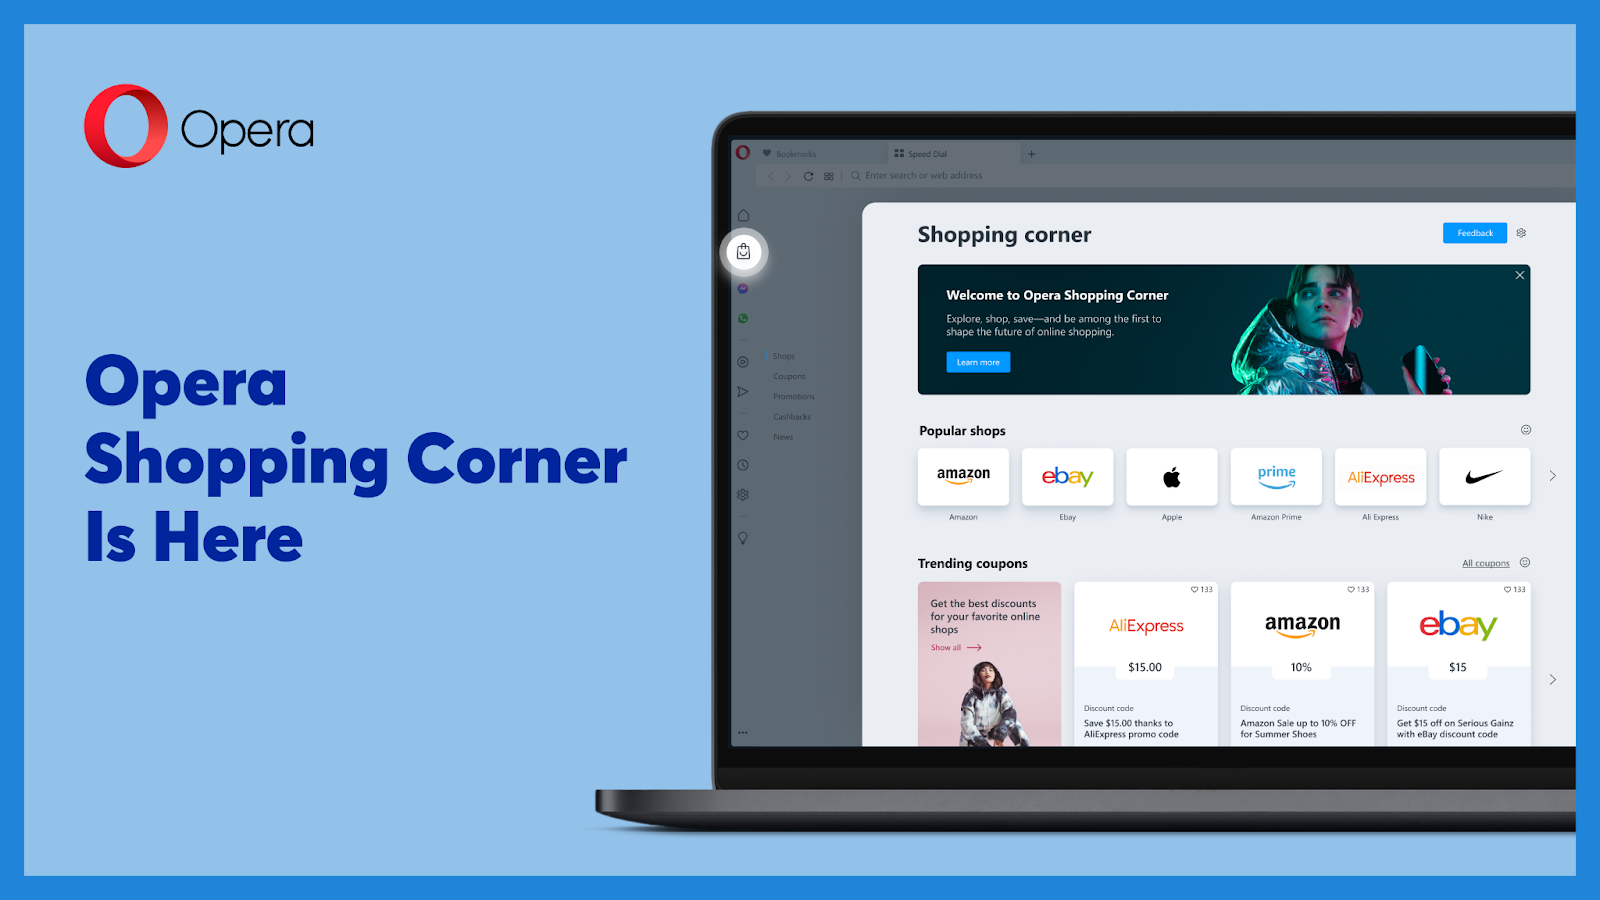 The image says "Opera Shopping Corner is Here", while showing the laptop with Shopping Corner opened in the Opera browser. There are sections like Popular shops and Trending coupons with the offers from AliExpress, Amazon, and eBay. 